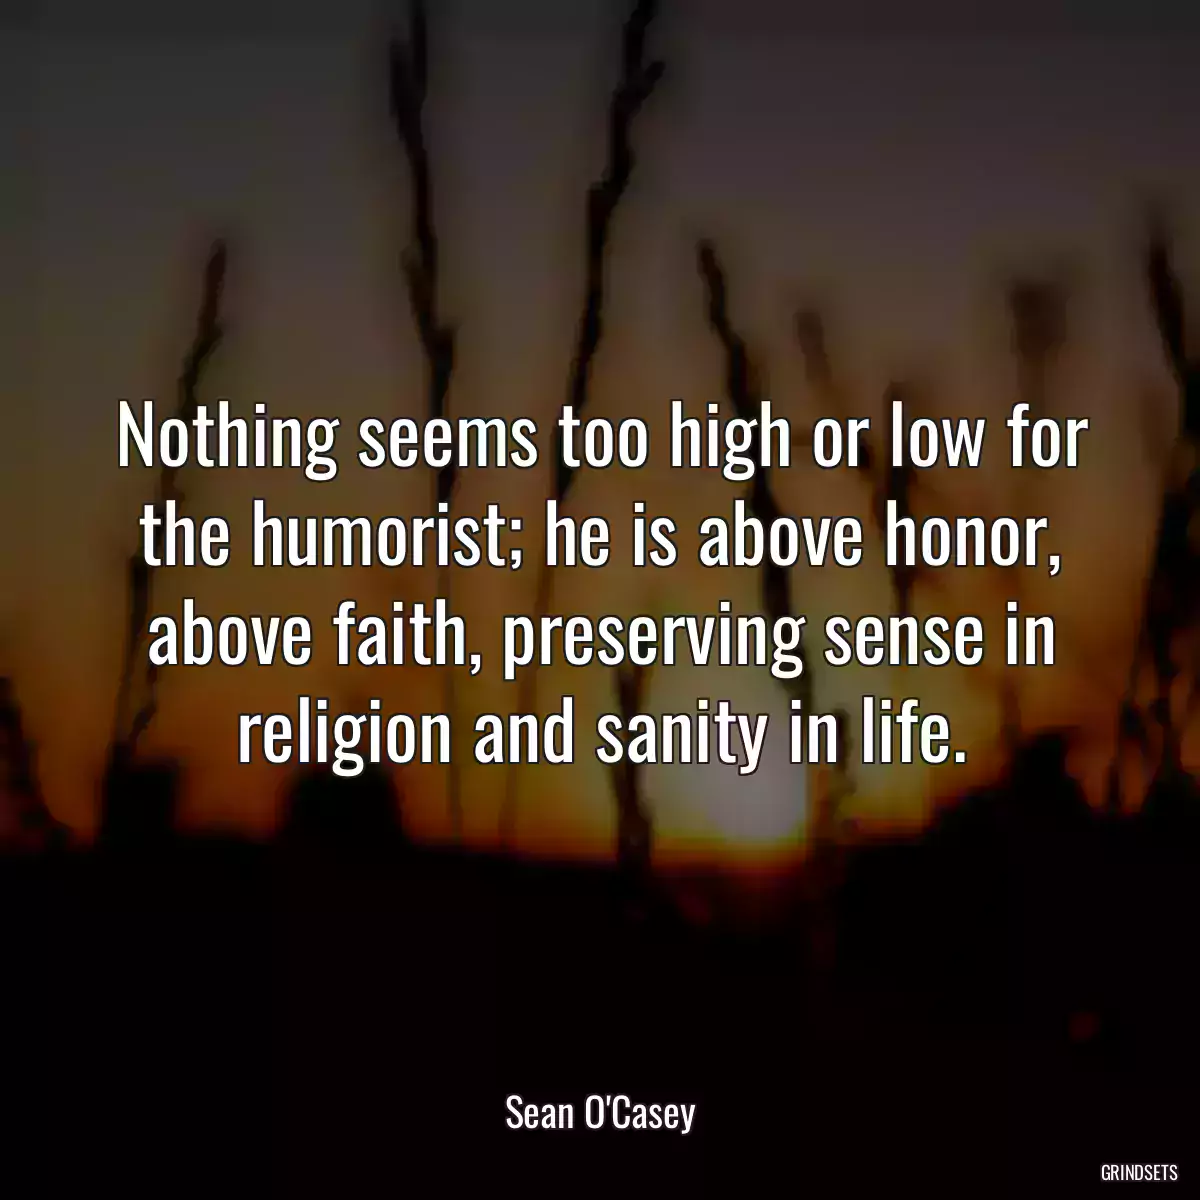 Nothing seems too high or low for the humorist; he is above honor, above faith, preserving sense in religion and sanity in life.